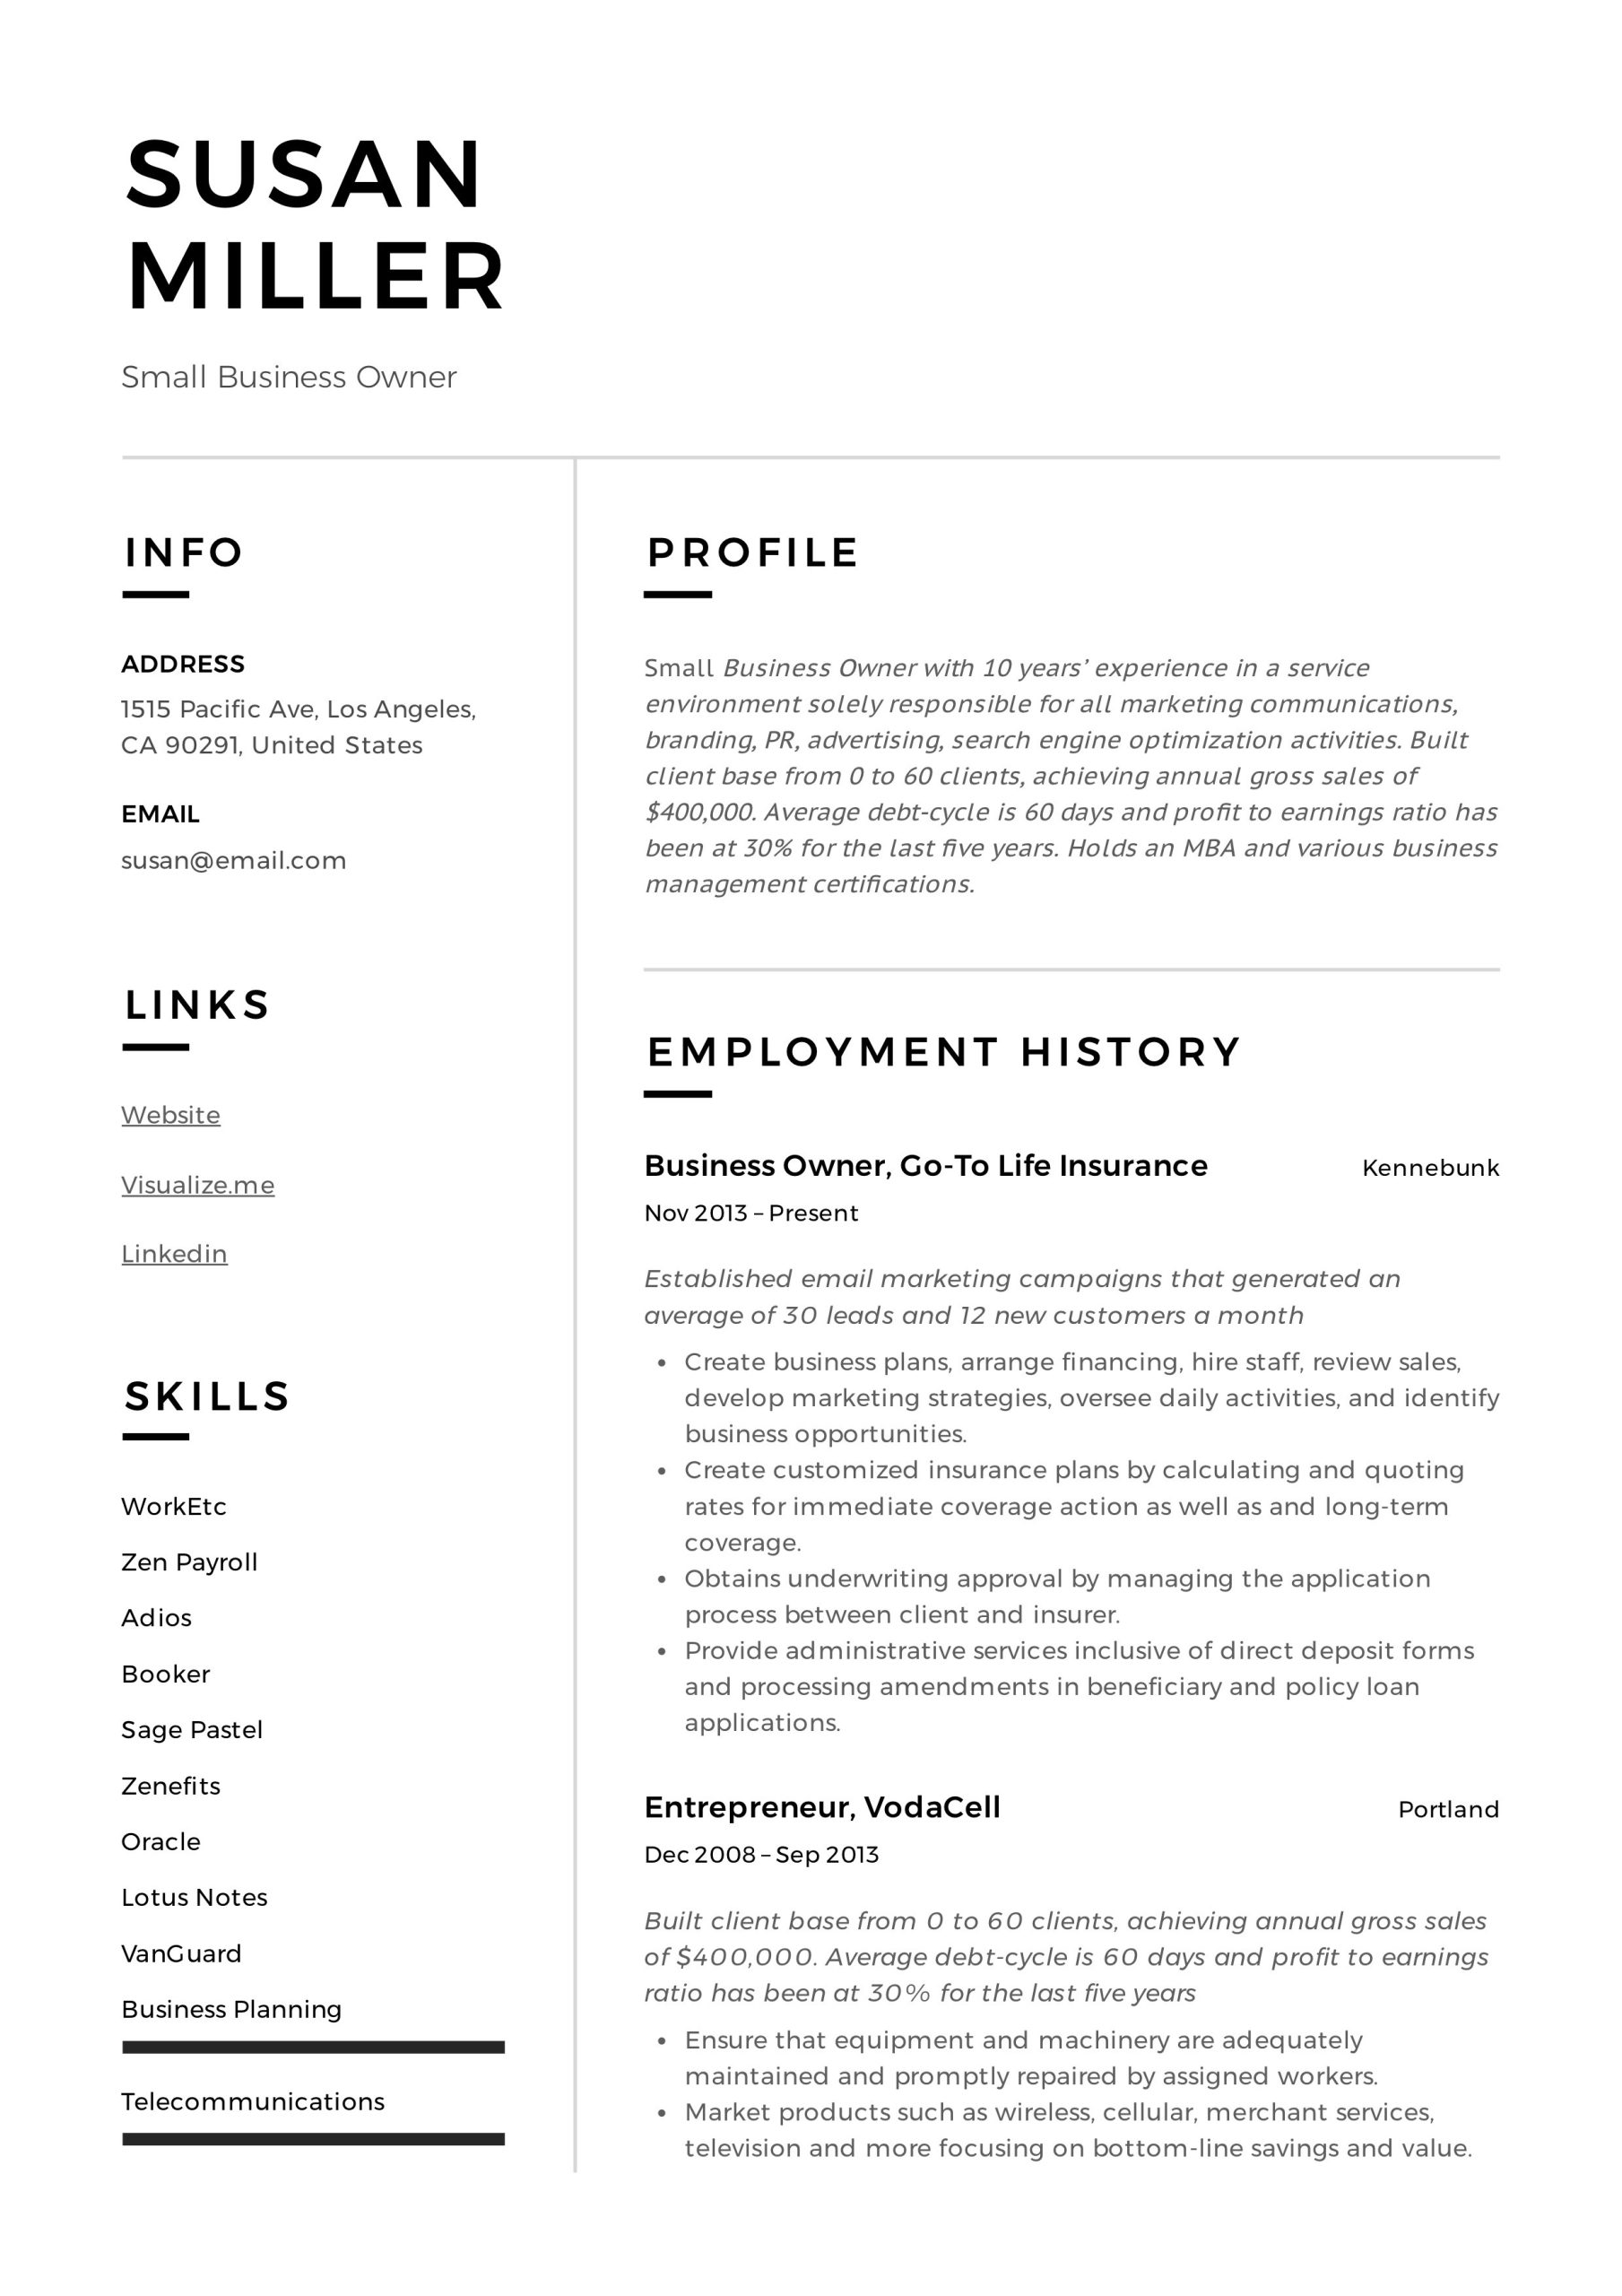 Free Sample Resume for Business Owner Small Business Owner Resumes  19 Examples Pdf 2022